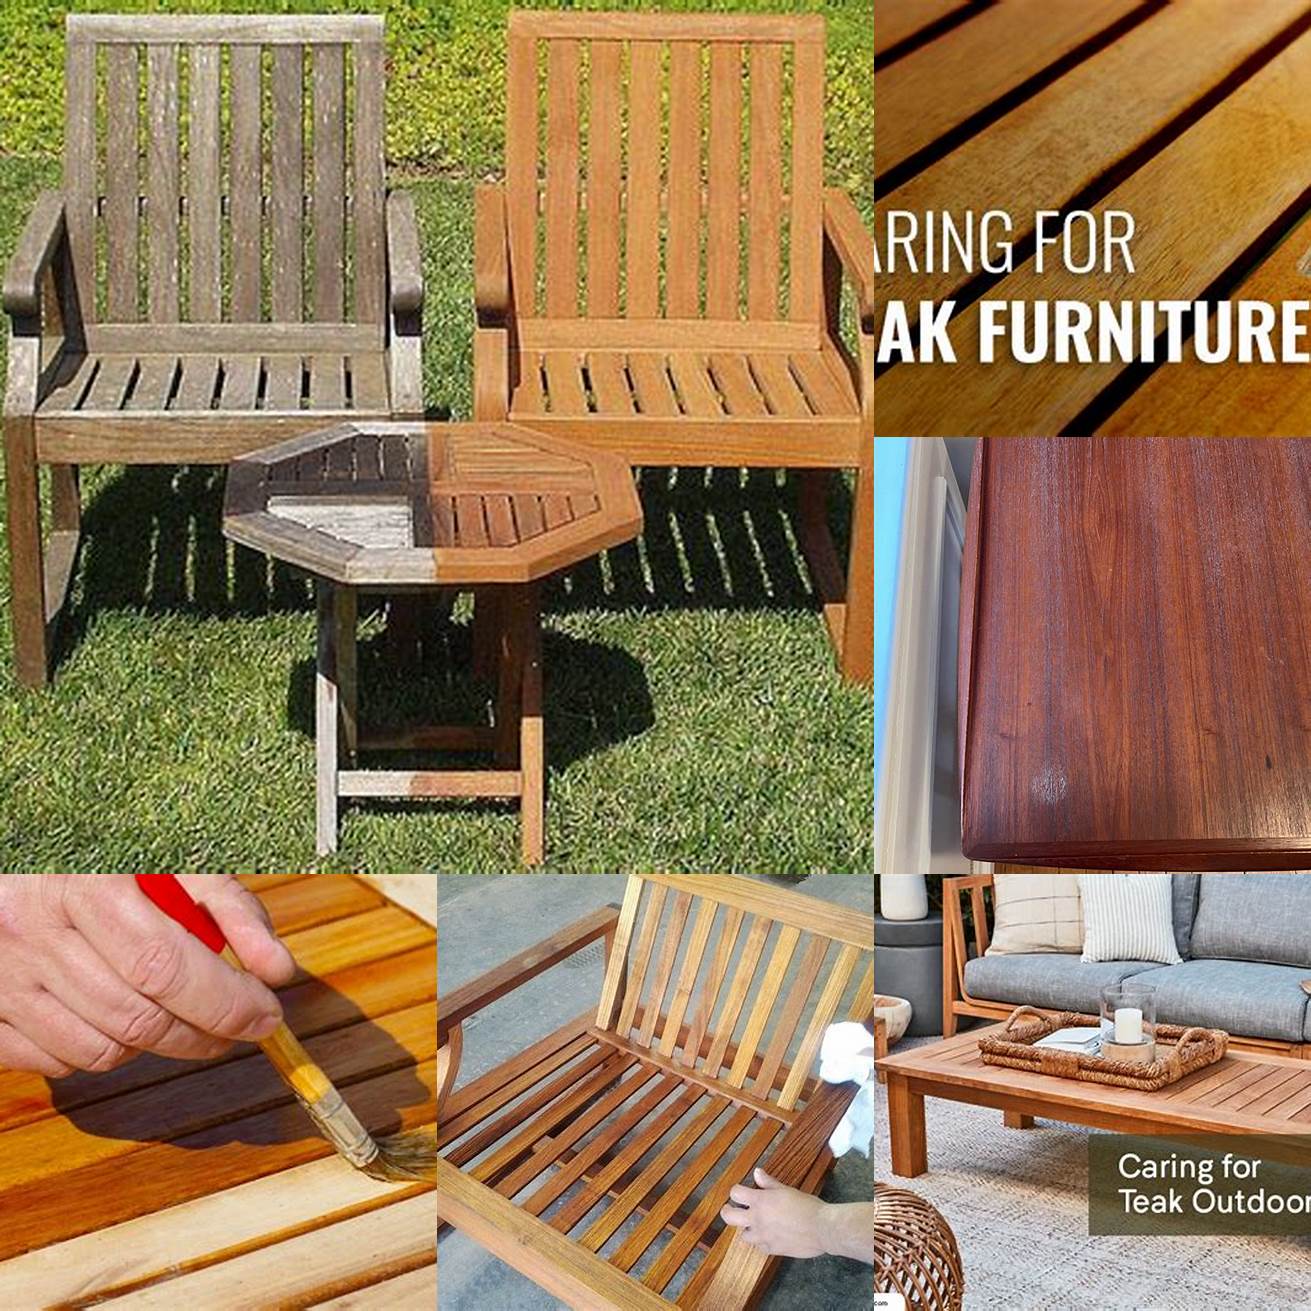 Caring for Teak Furniture Growth